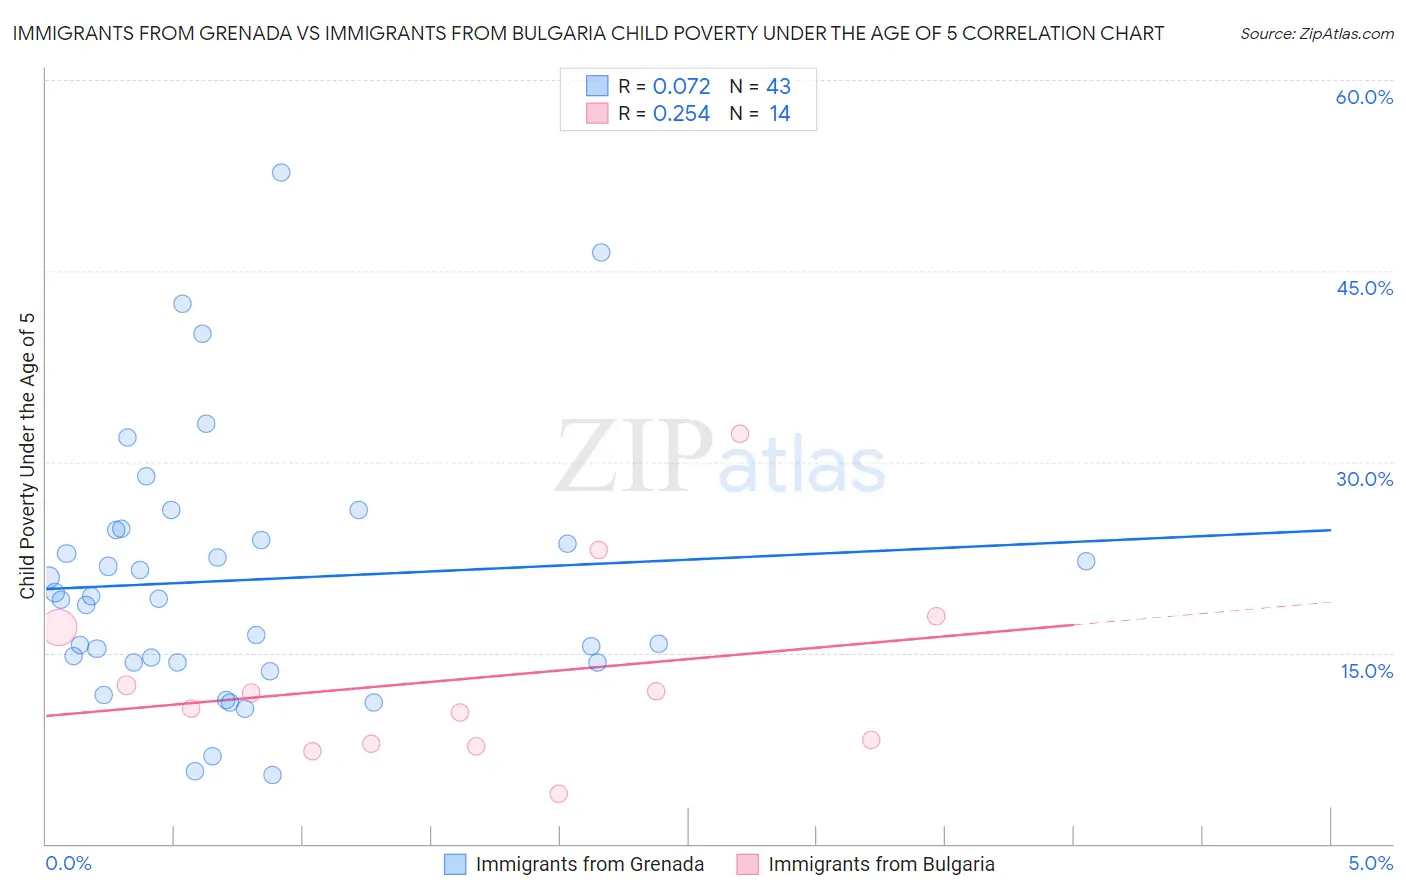 Immigrants from Grenada vs Immigrants from Bulgaria Child Poverty Under the Age of 5